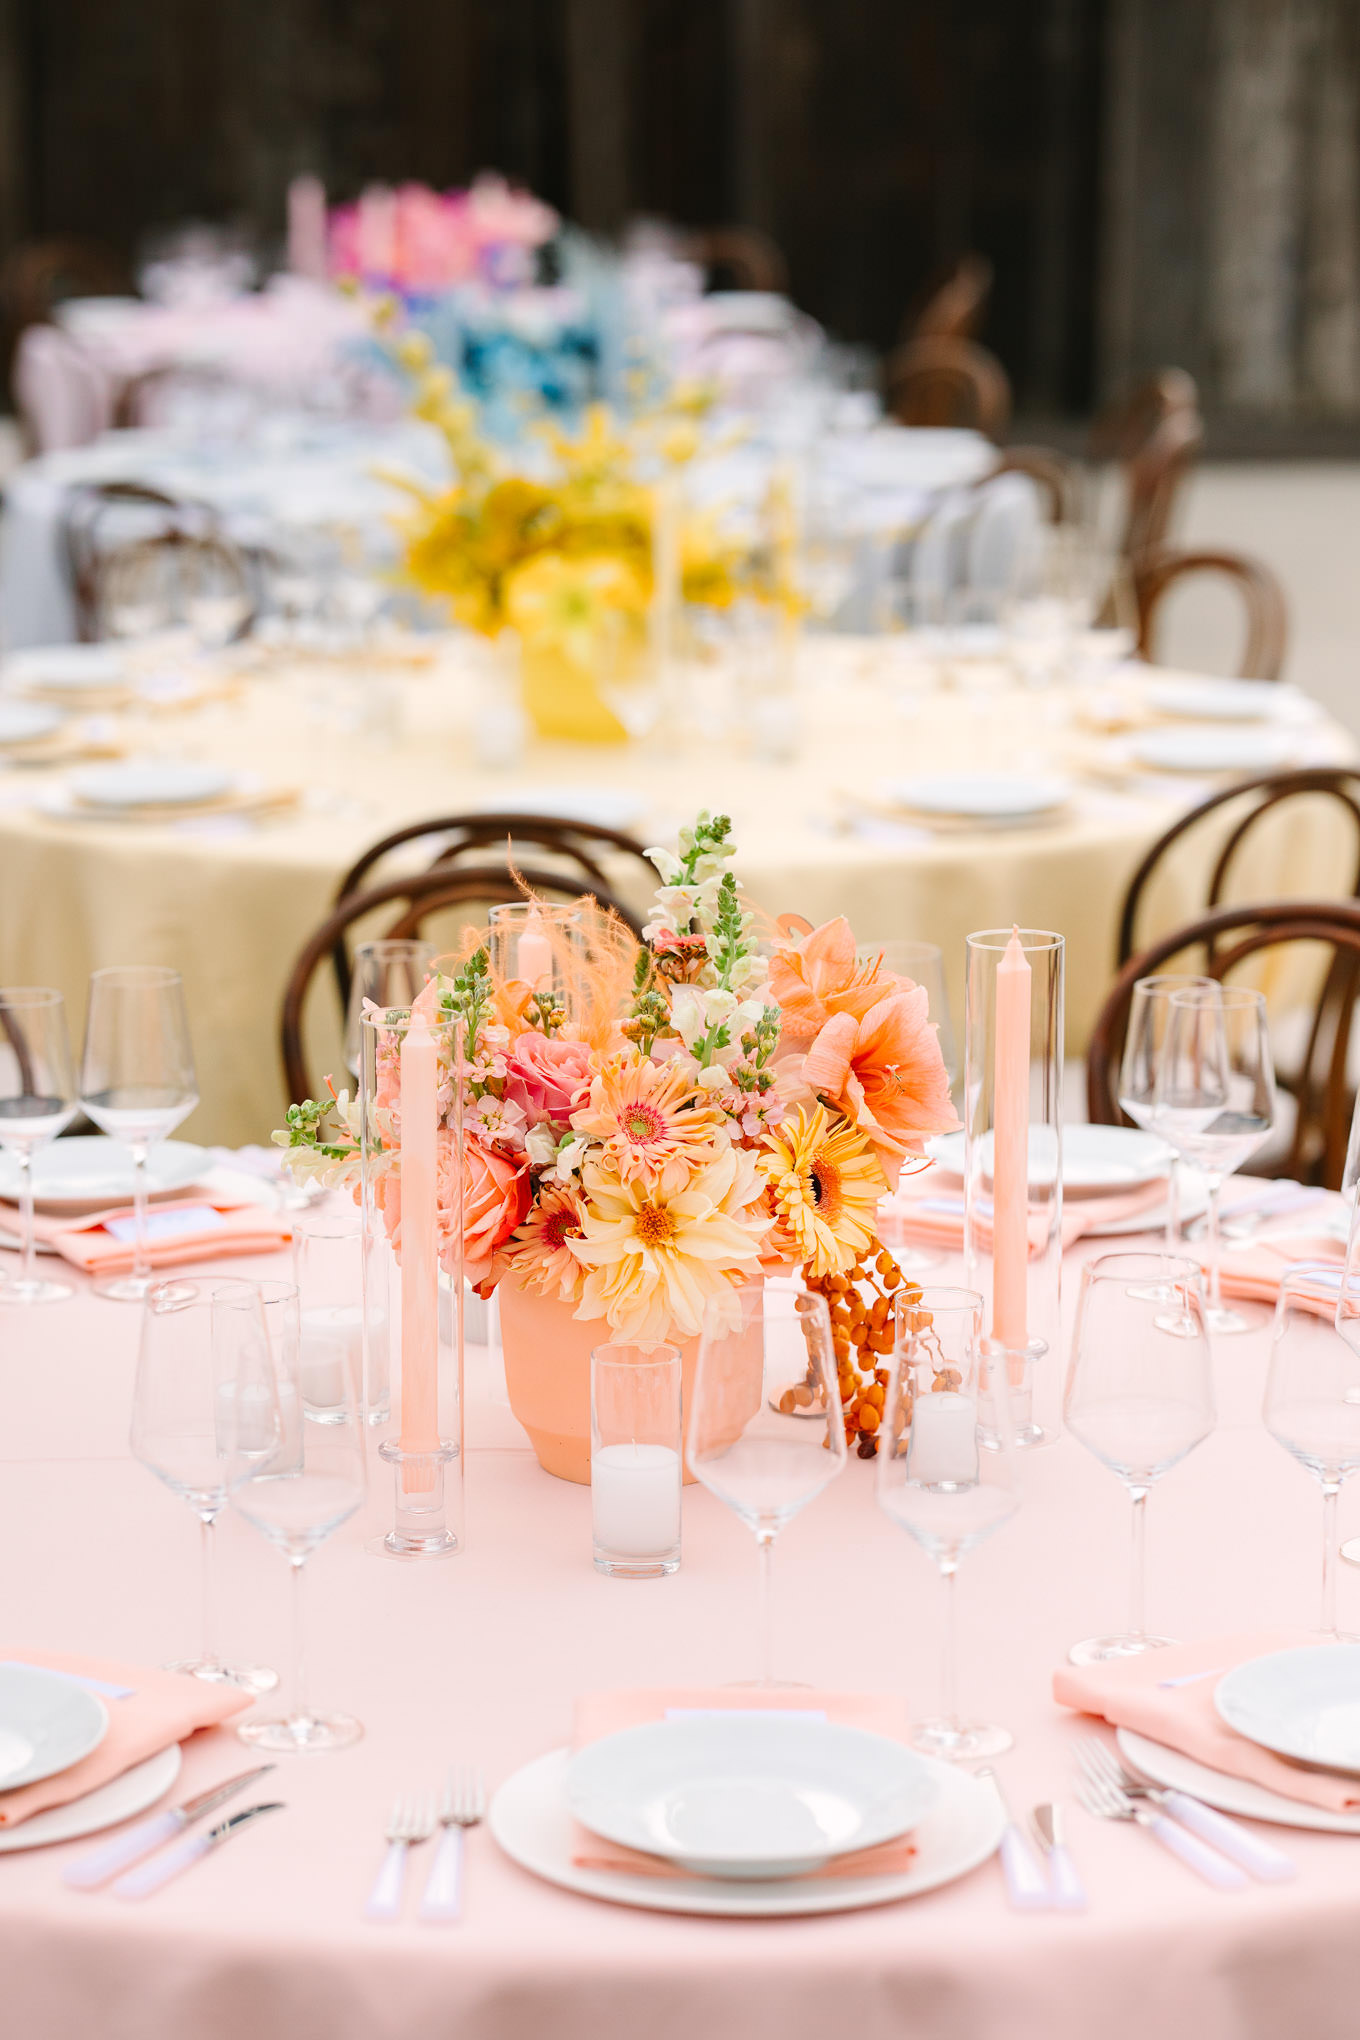 Monochromatic pastel wedding tables | Colorful and quirky wedding at Higuera Ranch in San Luis Obispo | #sanluisobispowedding #californiawedding #higueraranch #madonnainn   Source: Mary Costa Photography | Los Angeles